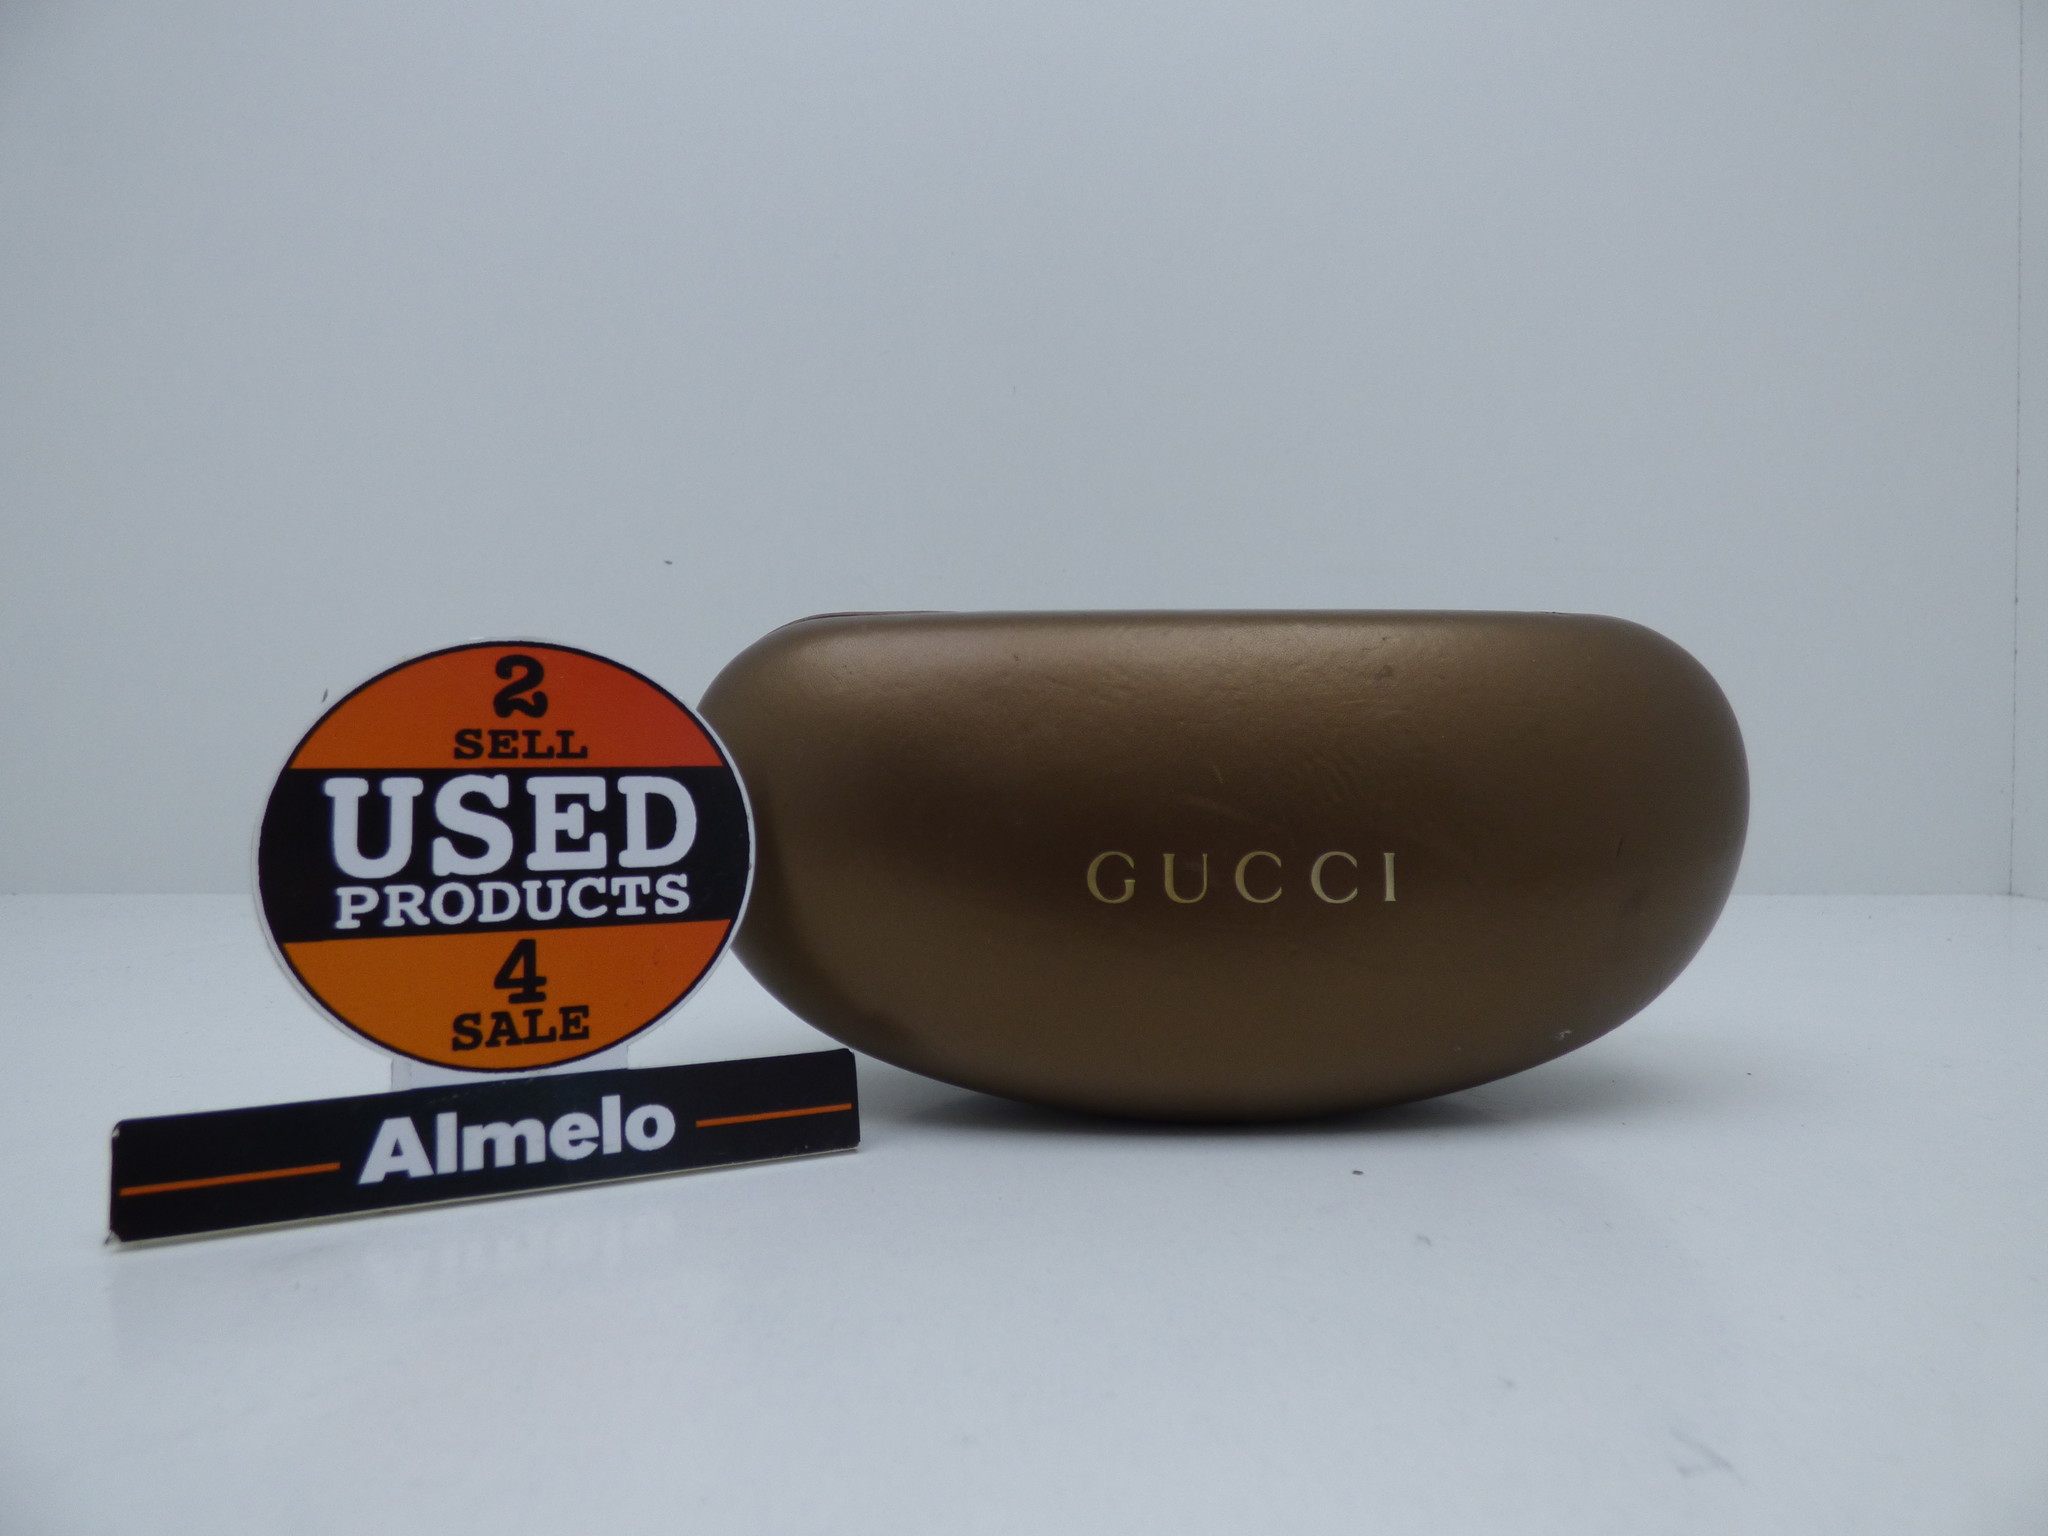 tapijt etnisch bitter Gucci Zonnebril GG 1012/S X7KYE 65 14 125/ - Used Products Almelo